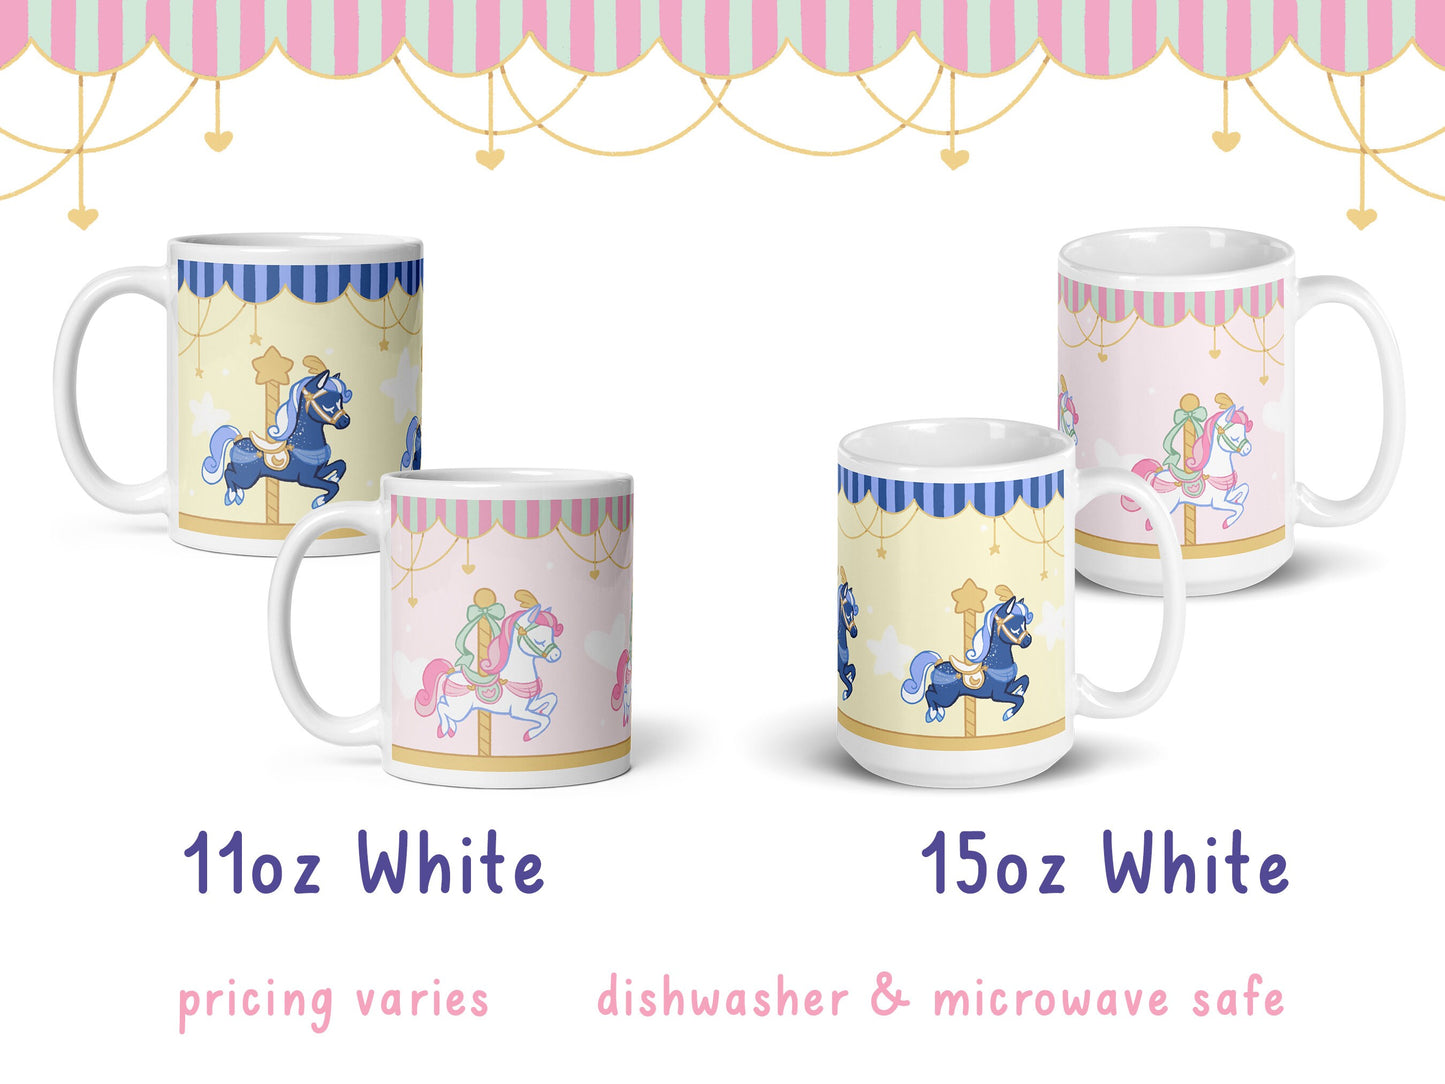 Carousel Horse Mug / hand drawn pony art pattern coffee cup, ponies pastel pink aesthetic starry celestial vintage